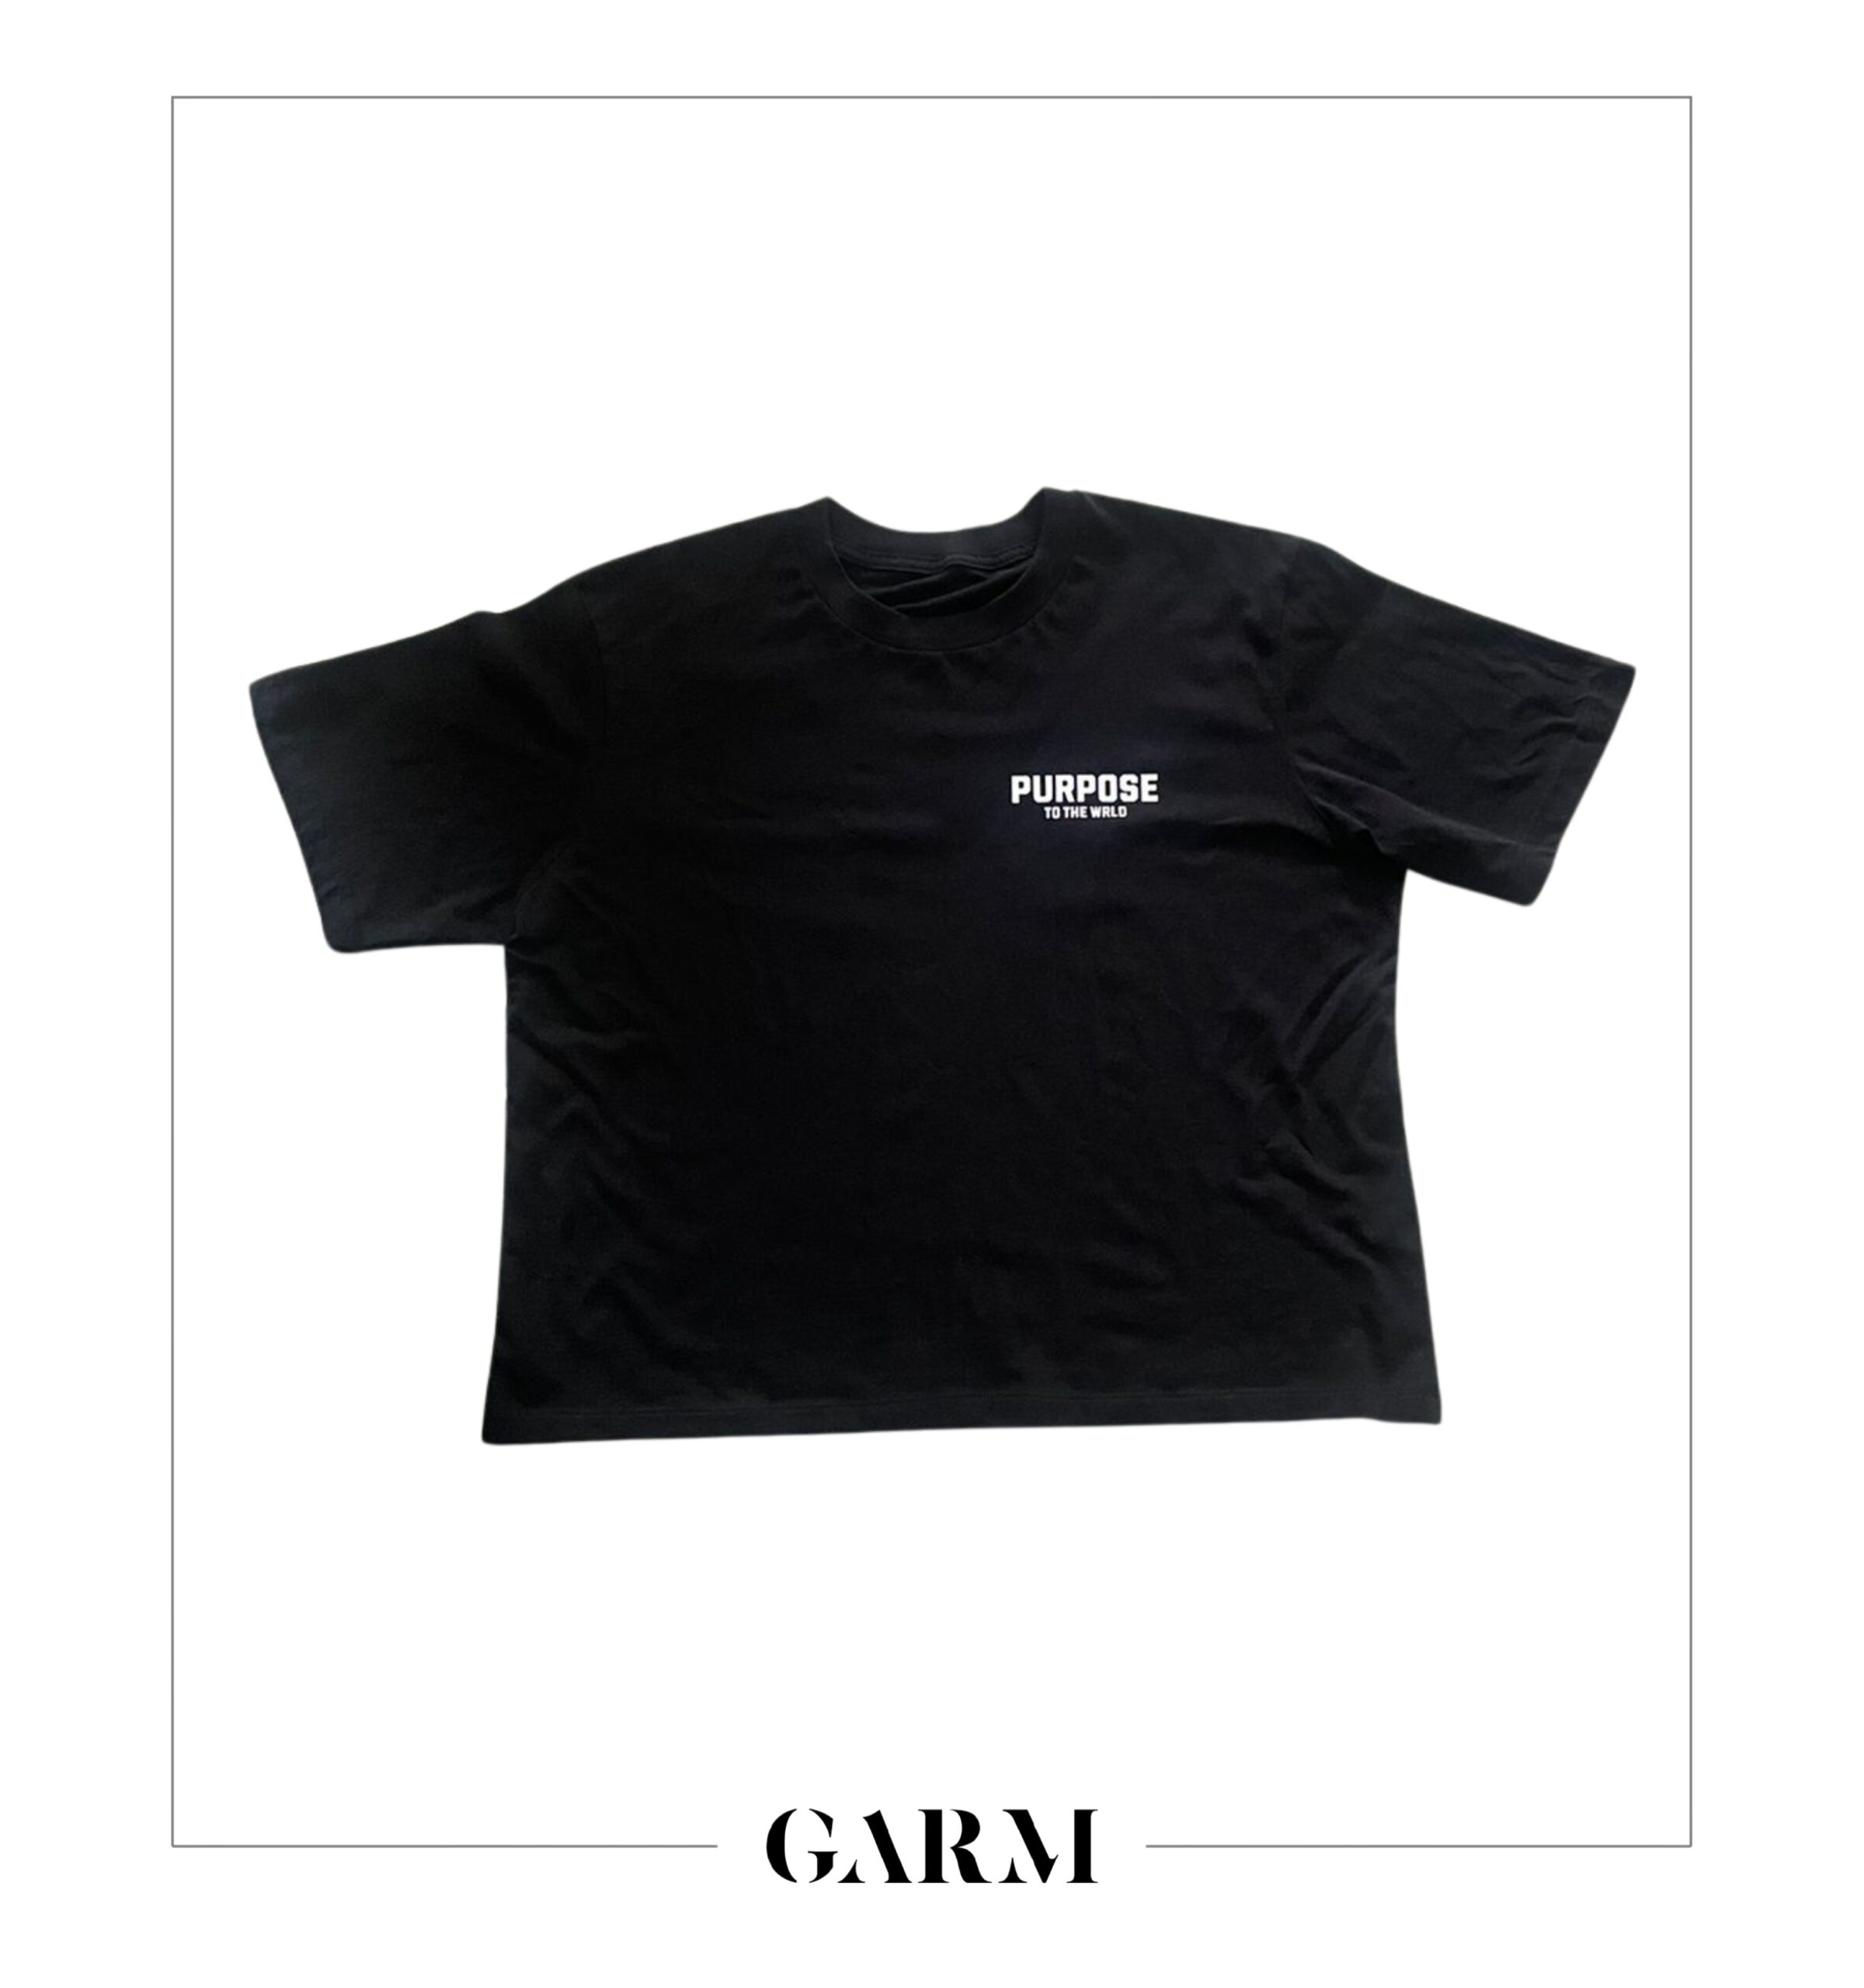 Purpose to the WRLD black tee’s available on Garm